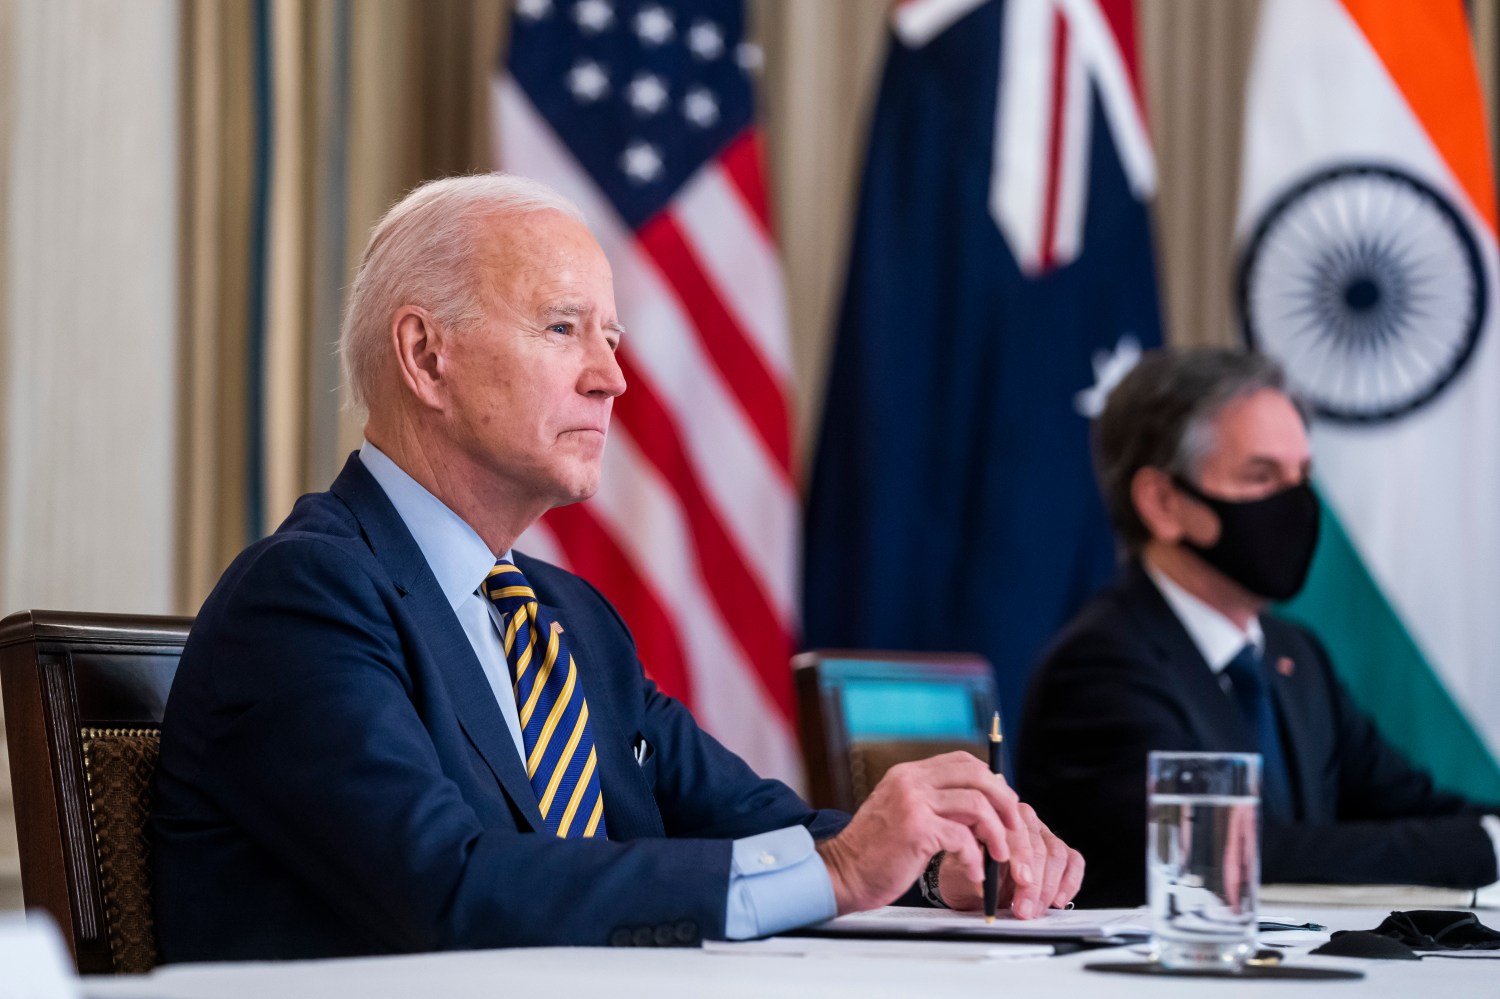 US President Joe Biden (L) and Secretary of State Antony Blinken (R) meet virtually with their counterparts in the ÔQuad,Õ Prime Minister Narendra Modi of India, Prime Minister Scott Morrison of Australia, and Prime Minister Yoshihide Suga of Japan, from the State Dining Room of the White House in Washington DC, USA, 12 March 2021. No Use Germany.